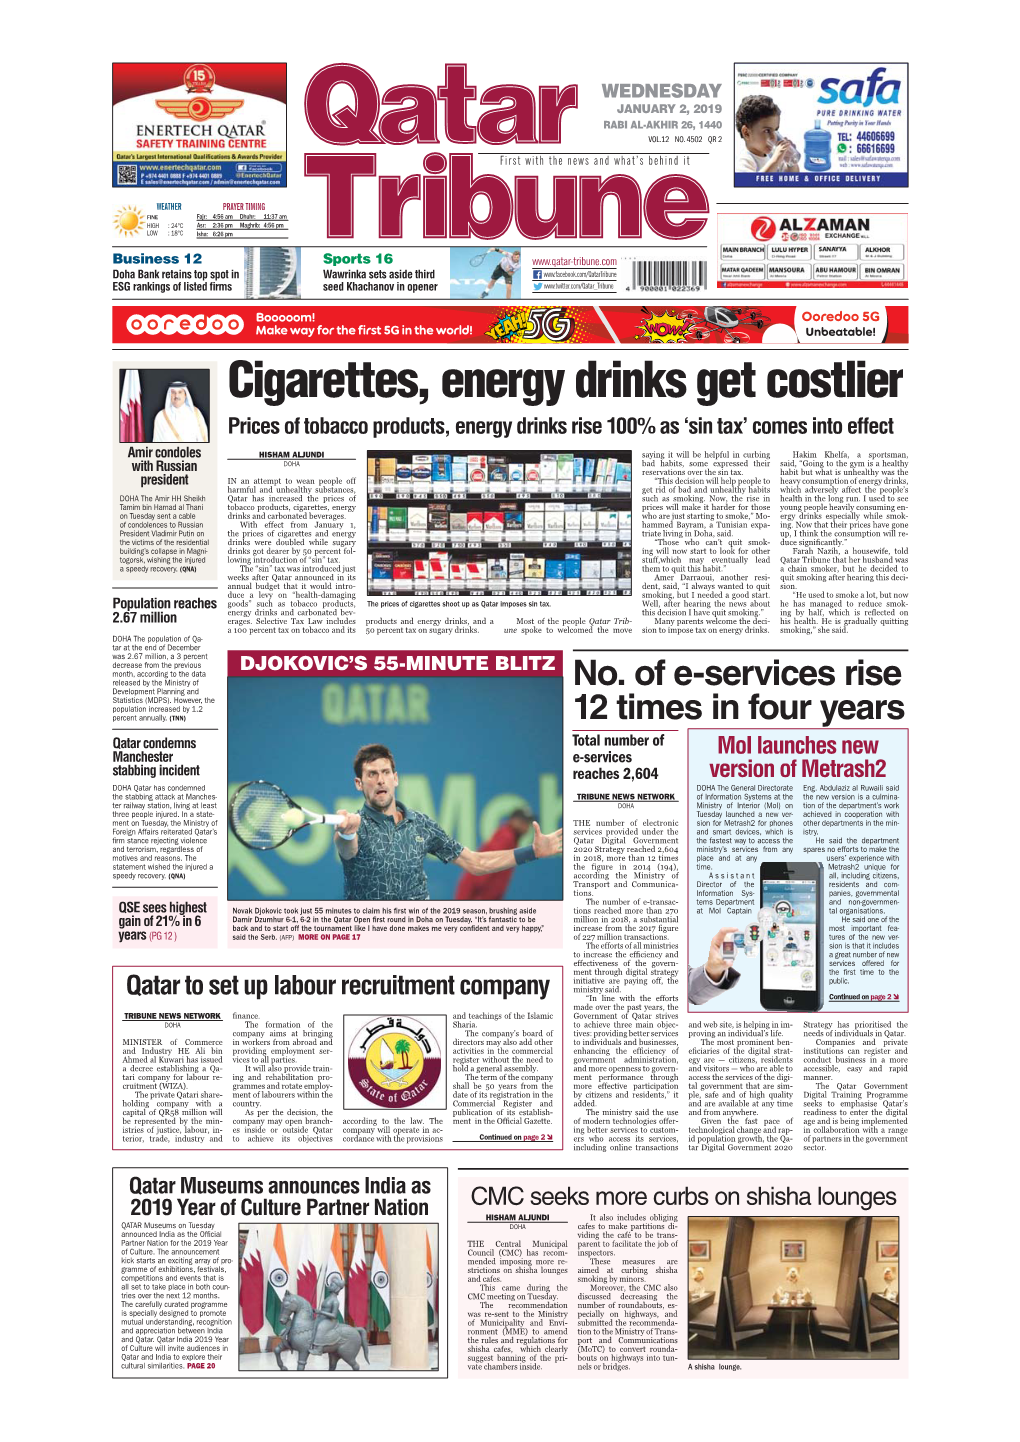 Cigarettes, Energy Drinks Get Costlier Prices of Tobacco Products, Energy Drinks Rise 100% As ‘Sin Tax’ Comes Into Effect